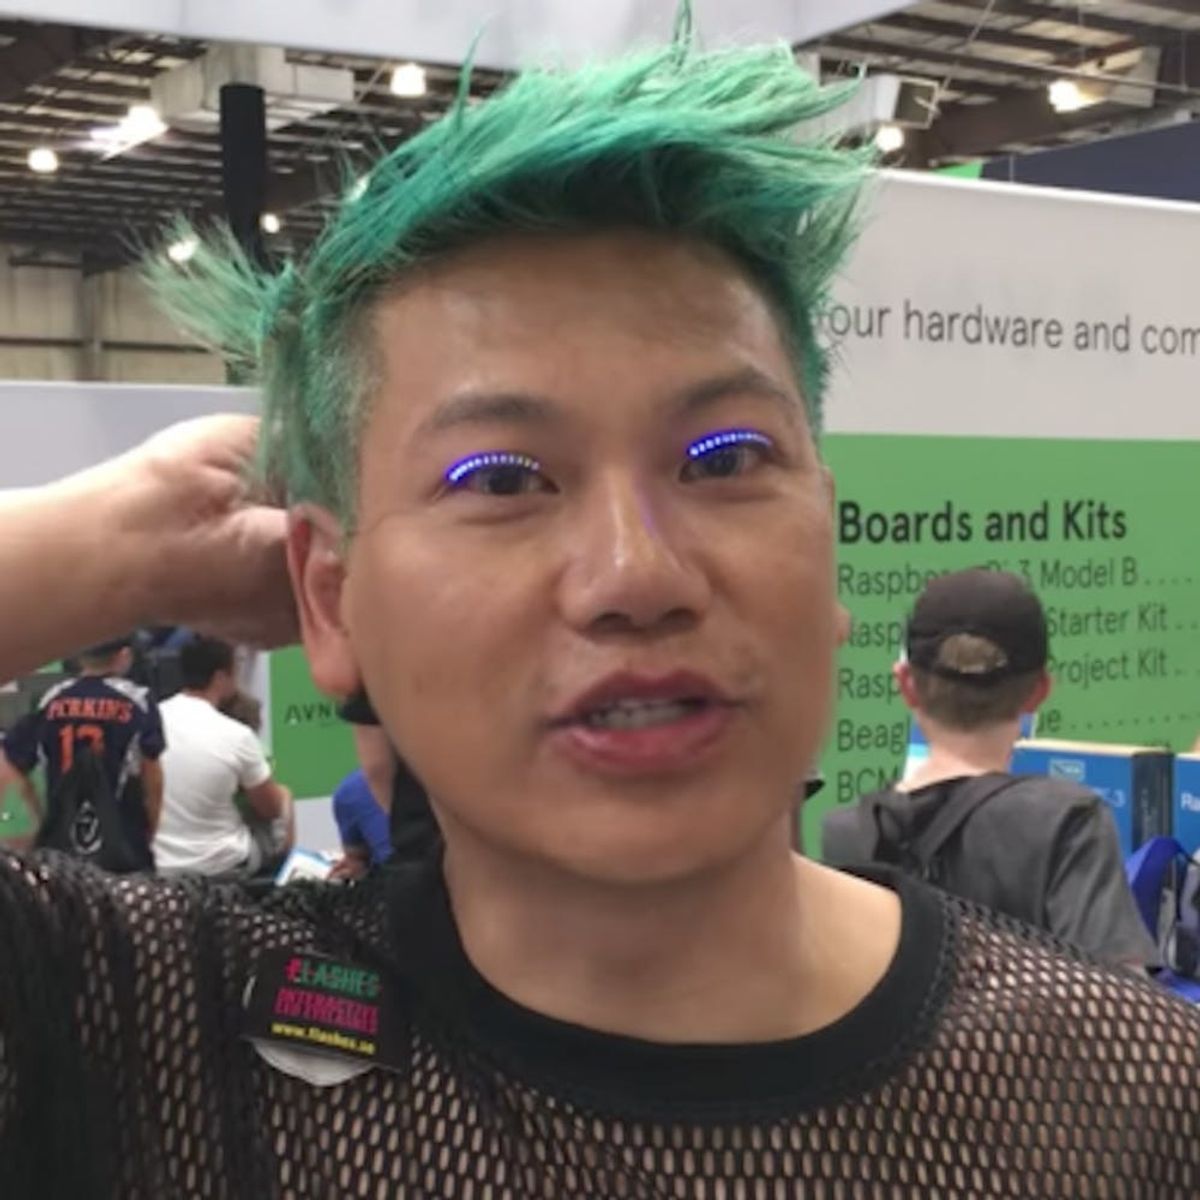 You Have to See These Insane New LED Eyelash Strips